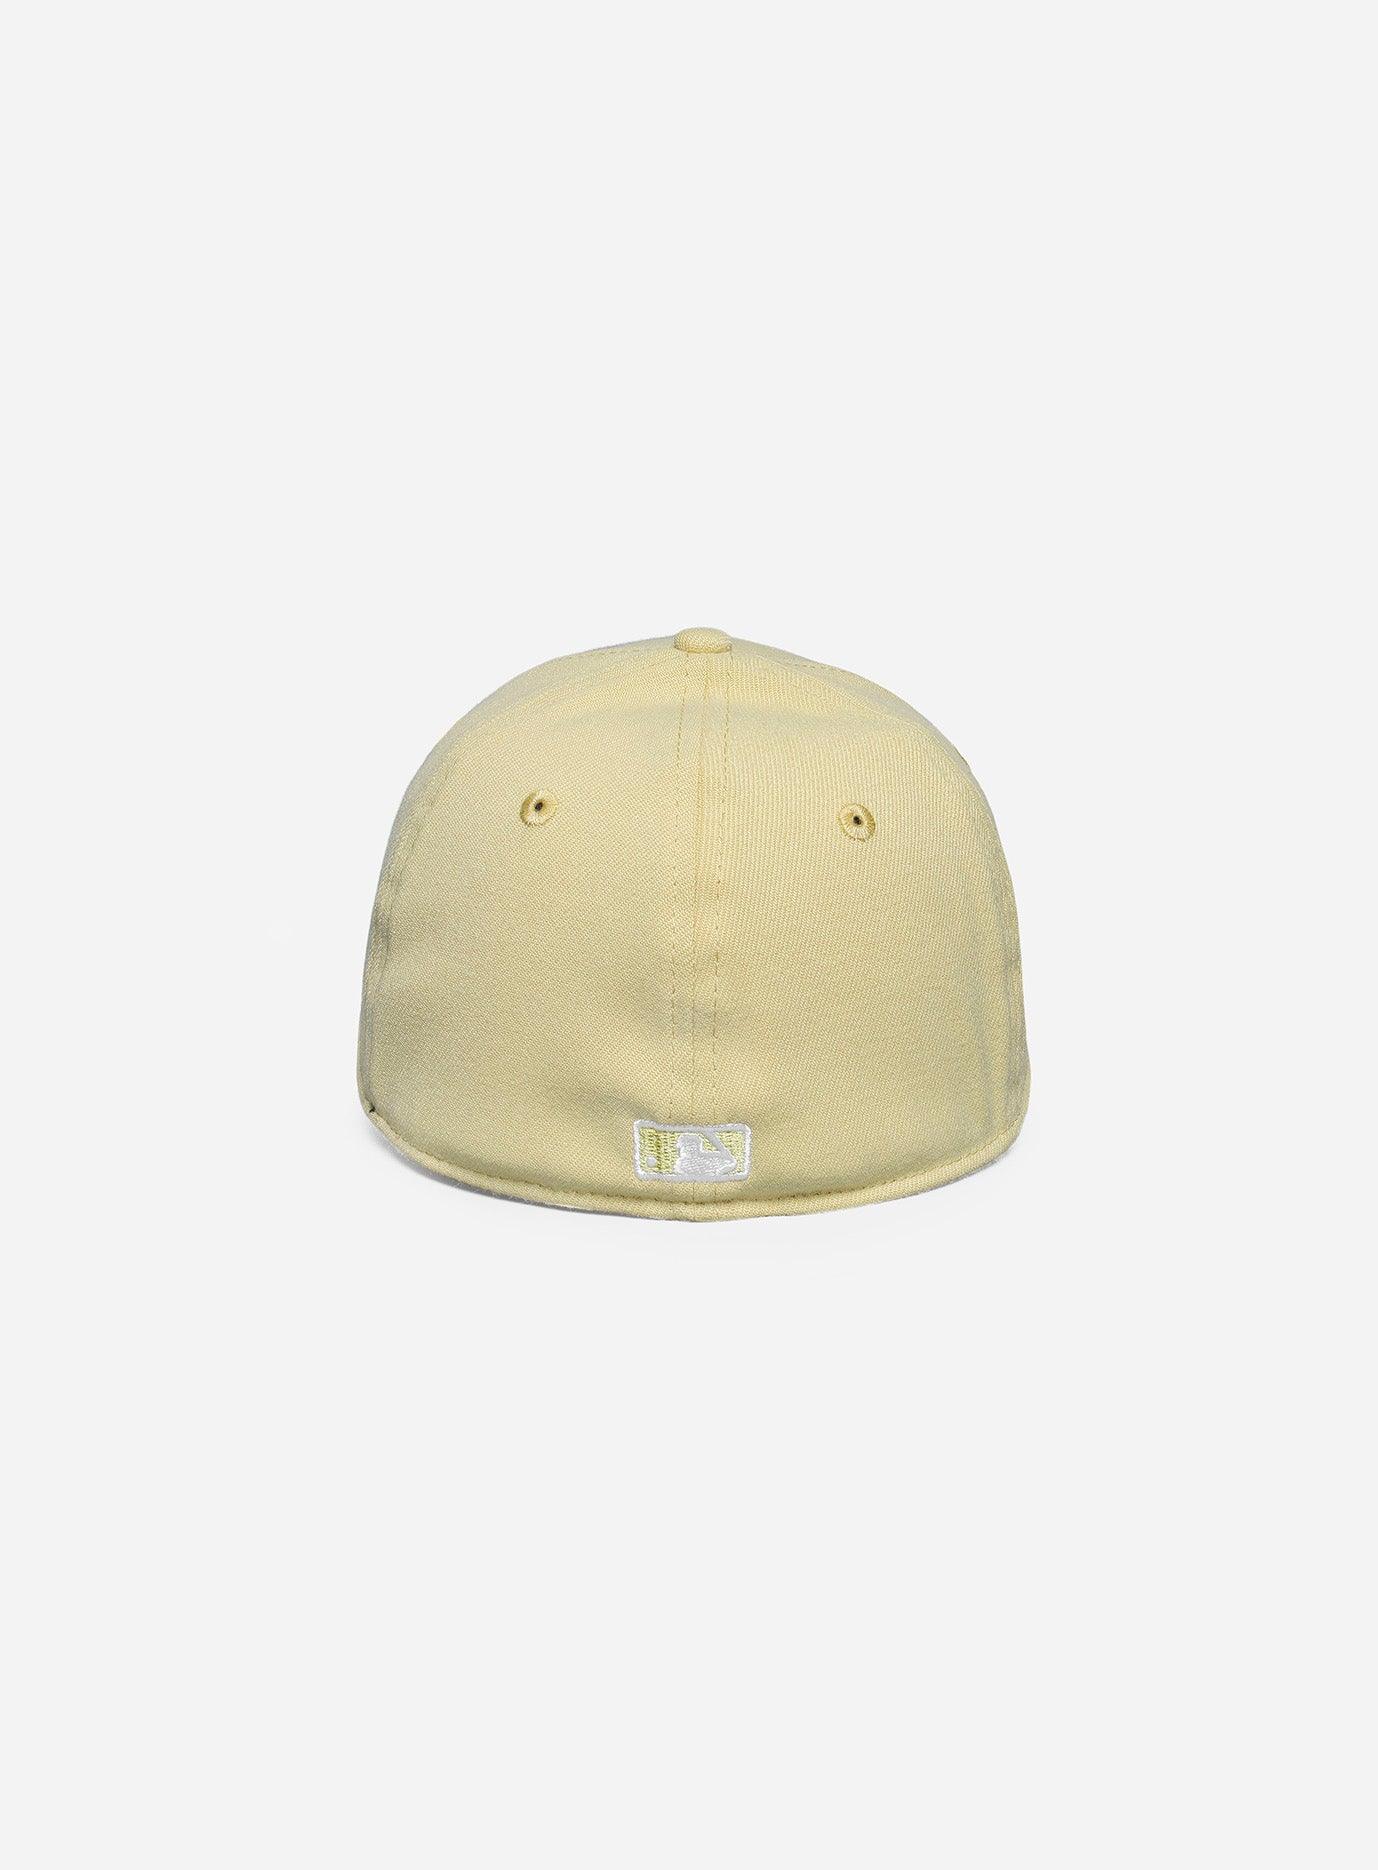 New Era Los Angeles Dodgers Earth Tones 39Thirty Fitted - Challenger Streetwear